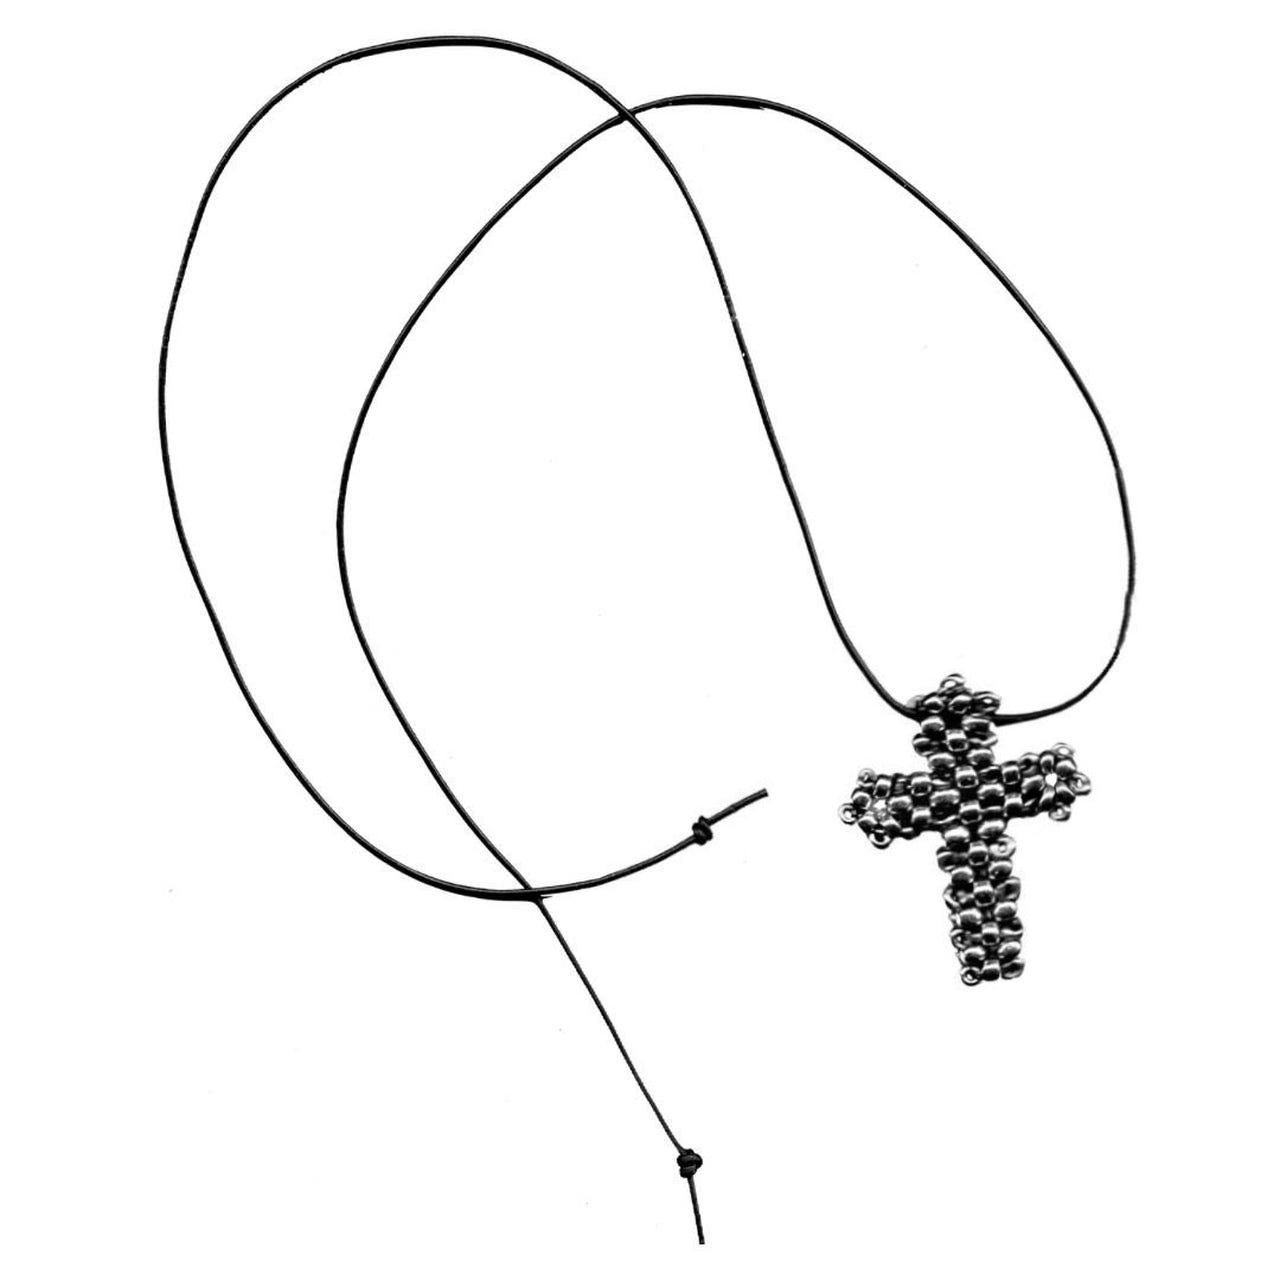 Silver Cross Necklace - Large